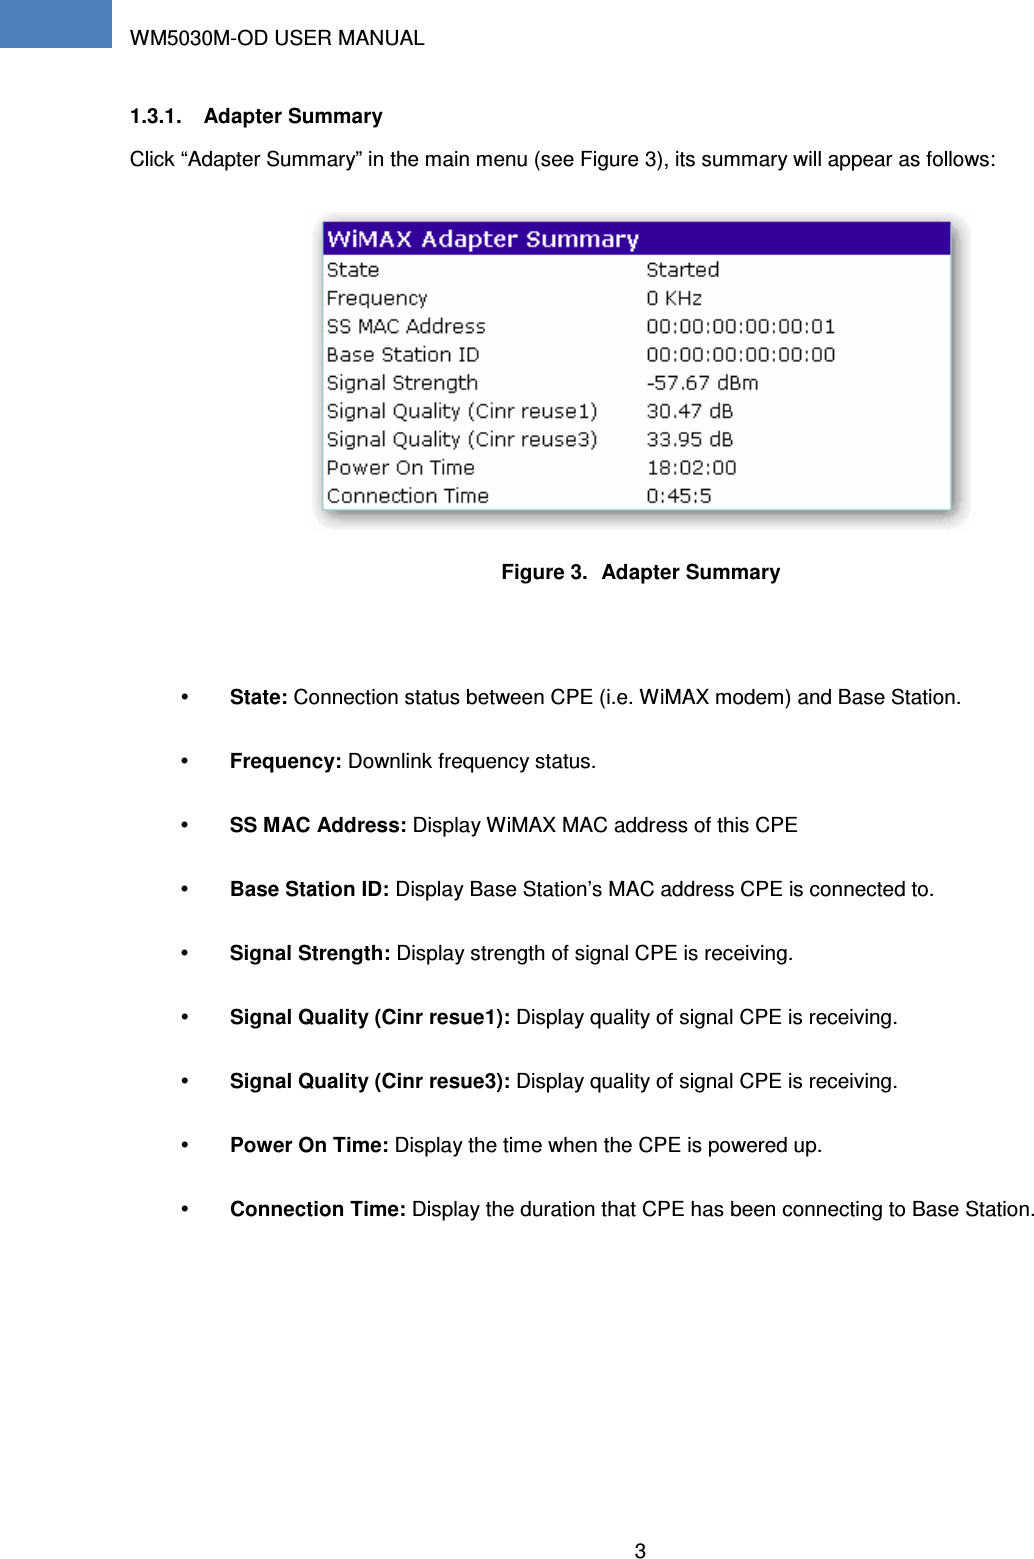 WM5030M-OD USER MANUAL 3    1.3.1.  Adapter Summary Click “Adapter Summary” in the main menu (see Figure 3), its summary will appear as follows:  Figure 3.  Adapter Summary   State: Connection status between CPE (i.e. WiMAX modem) and Base Station.  Frequency: Downlink frequency status.  SS MAC Address: Display WiMAX MAC address of this CPE  Base Station ID: Display Base Station’s MAC address CPE is connected to.  Signal Strength: Display strength of signal CPE is receiving.  Signal Quality (Cinr resue1): Display quality of signal CPE is receiving.  Signal Quality (Cinr resue3): Display quality of signal CPE is receiving.  Power On Time: Display the time when the CPE is powered up.  Connection Time: Display the duration that CPE has been connecting to Base Station. 